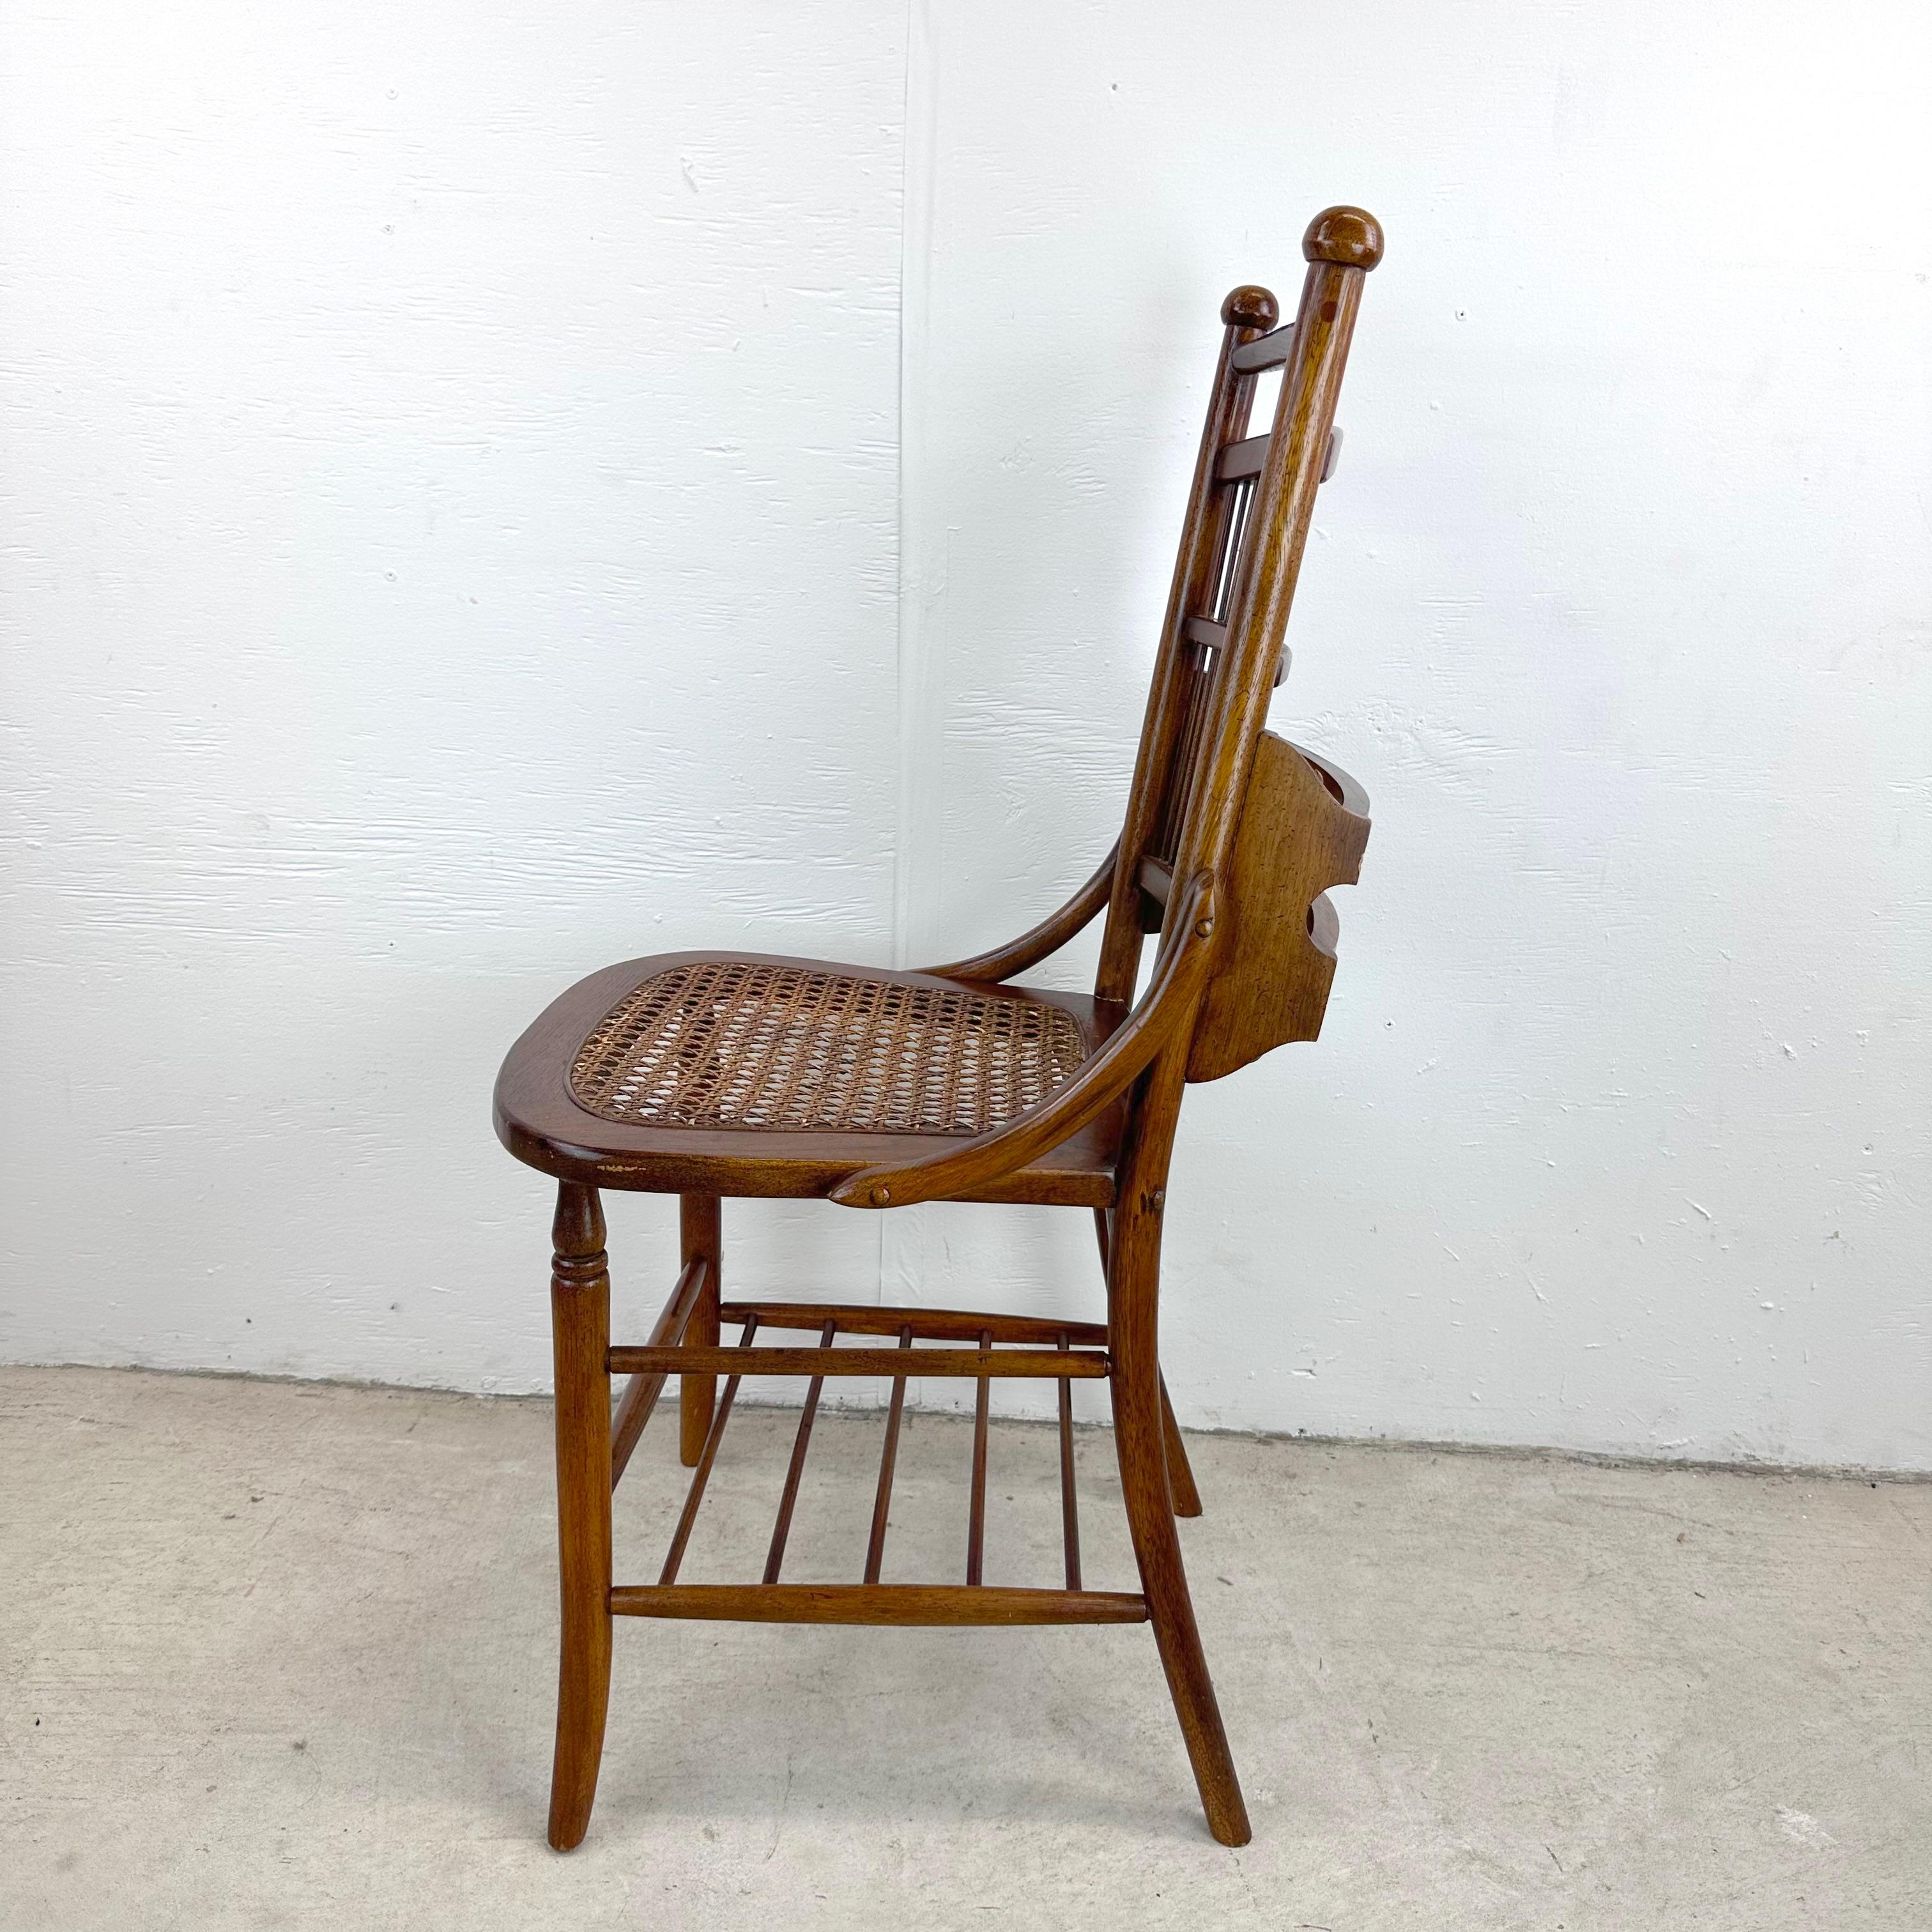 Antique Side Chair With Cane Seat and Spindle Back For Sale 3